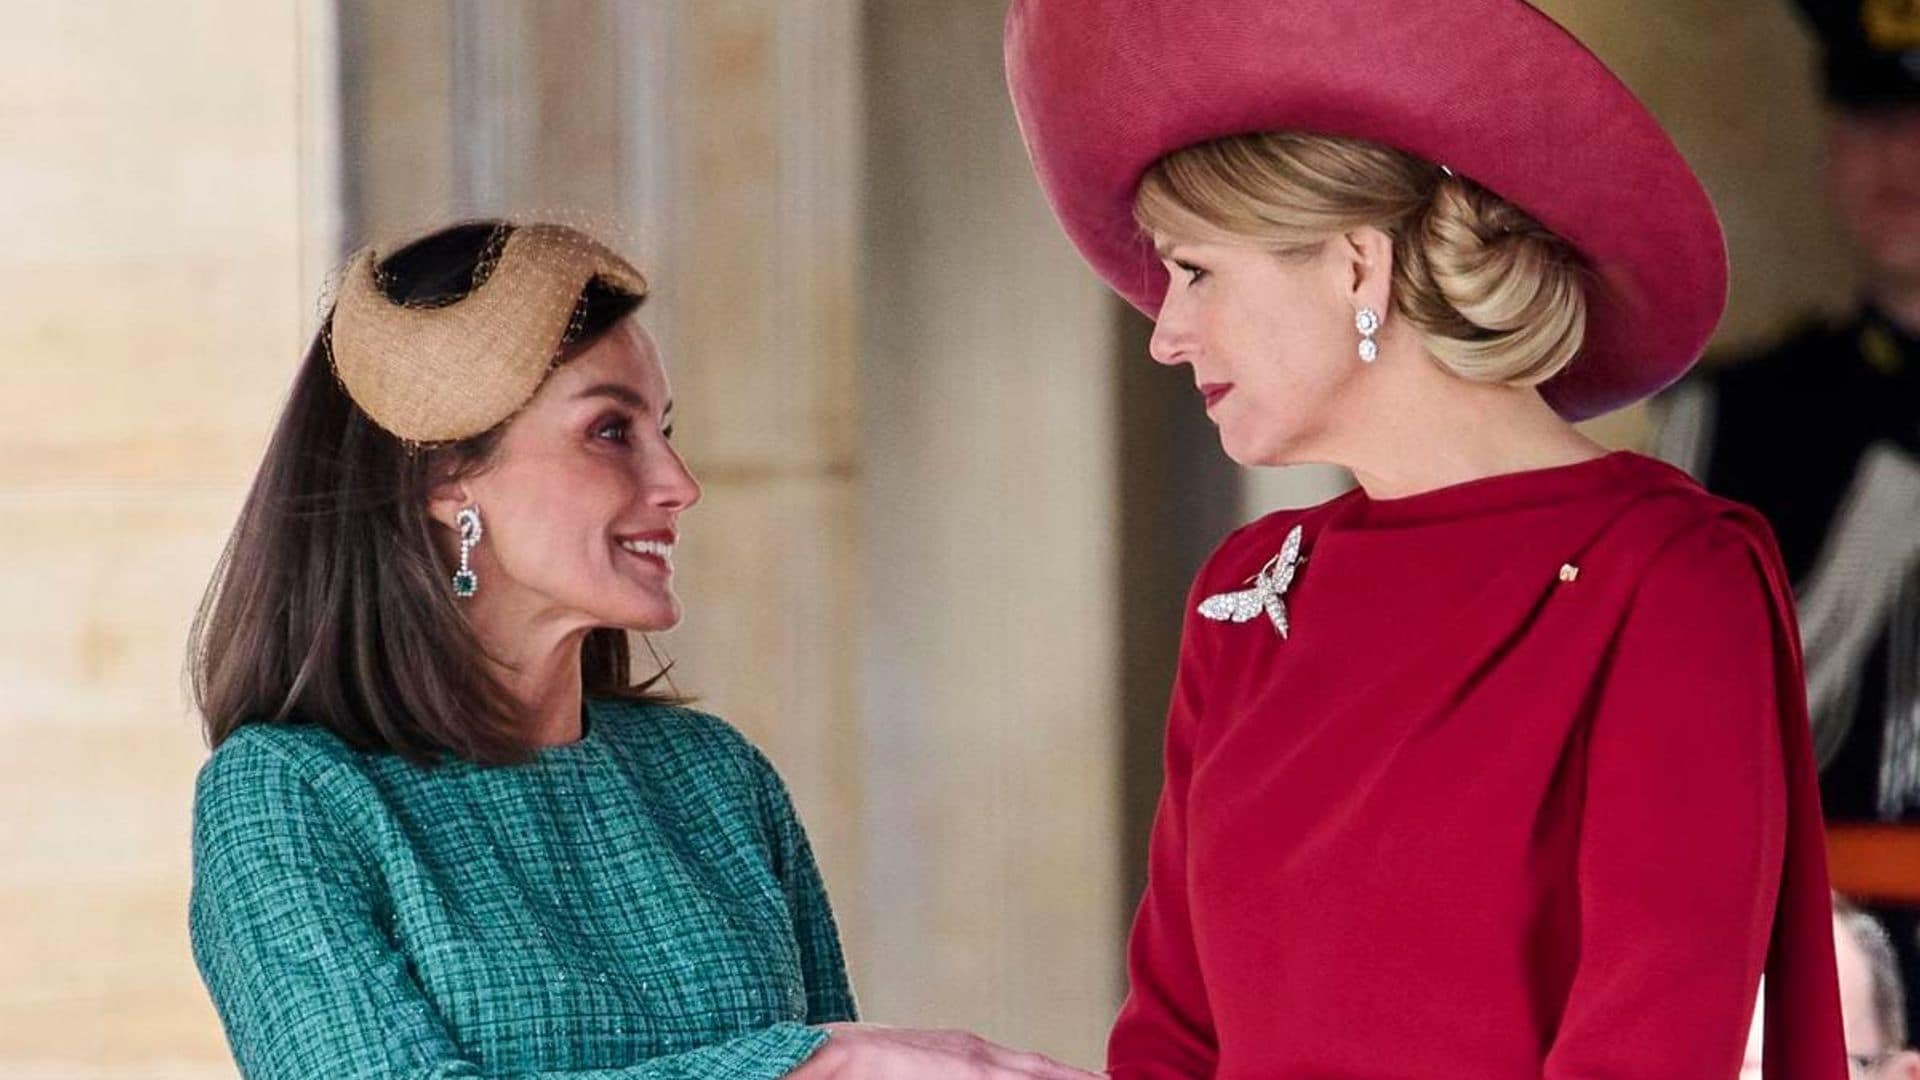 Queen Maxima and Queen Letizia have a stylish reunion in the Netherlands